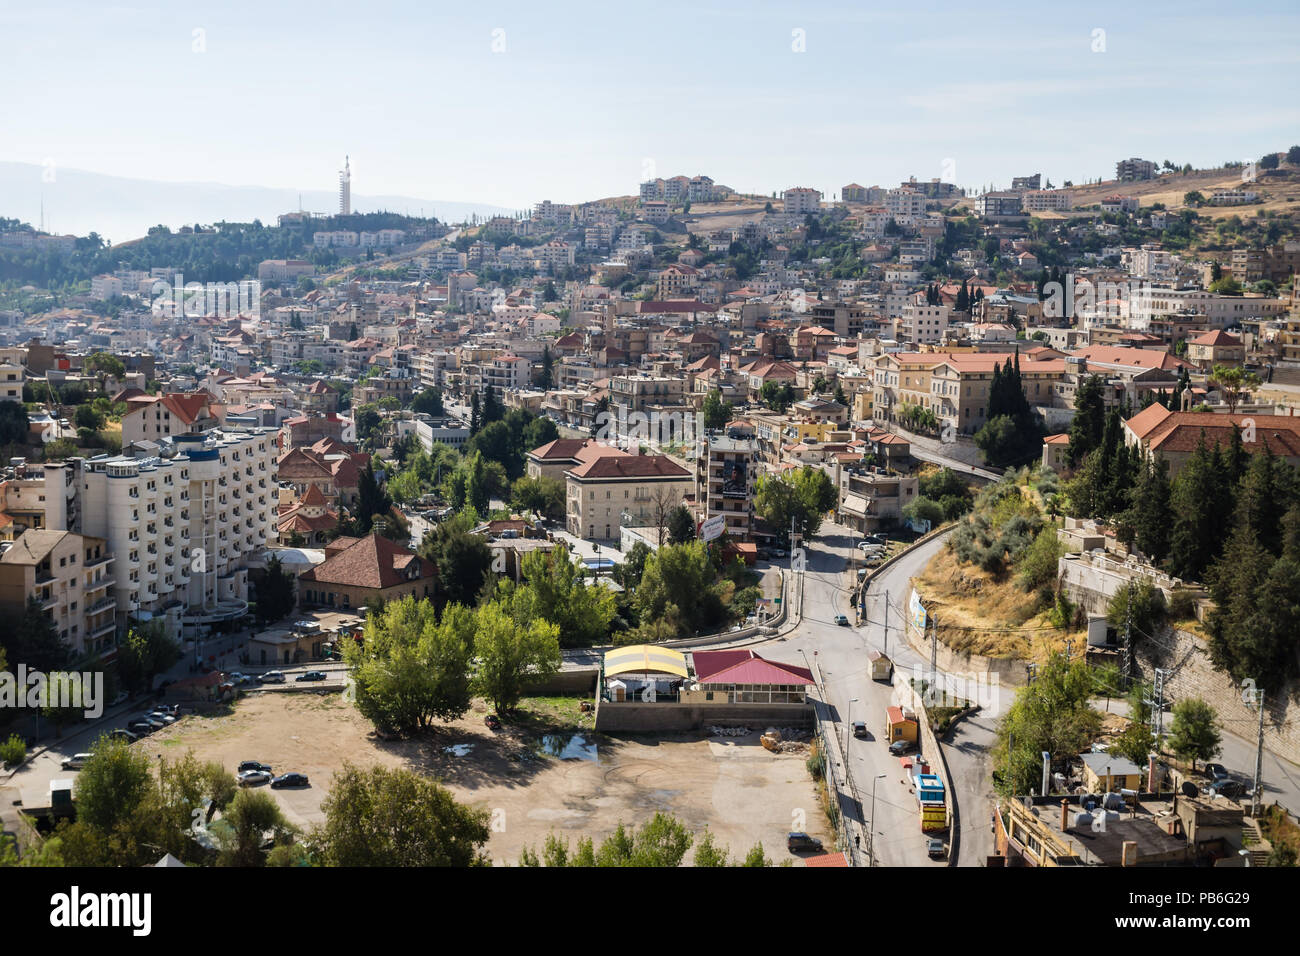 Morning view of the cityscape of Zahle, Lebanon Stock Photo